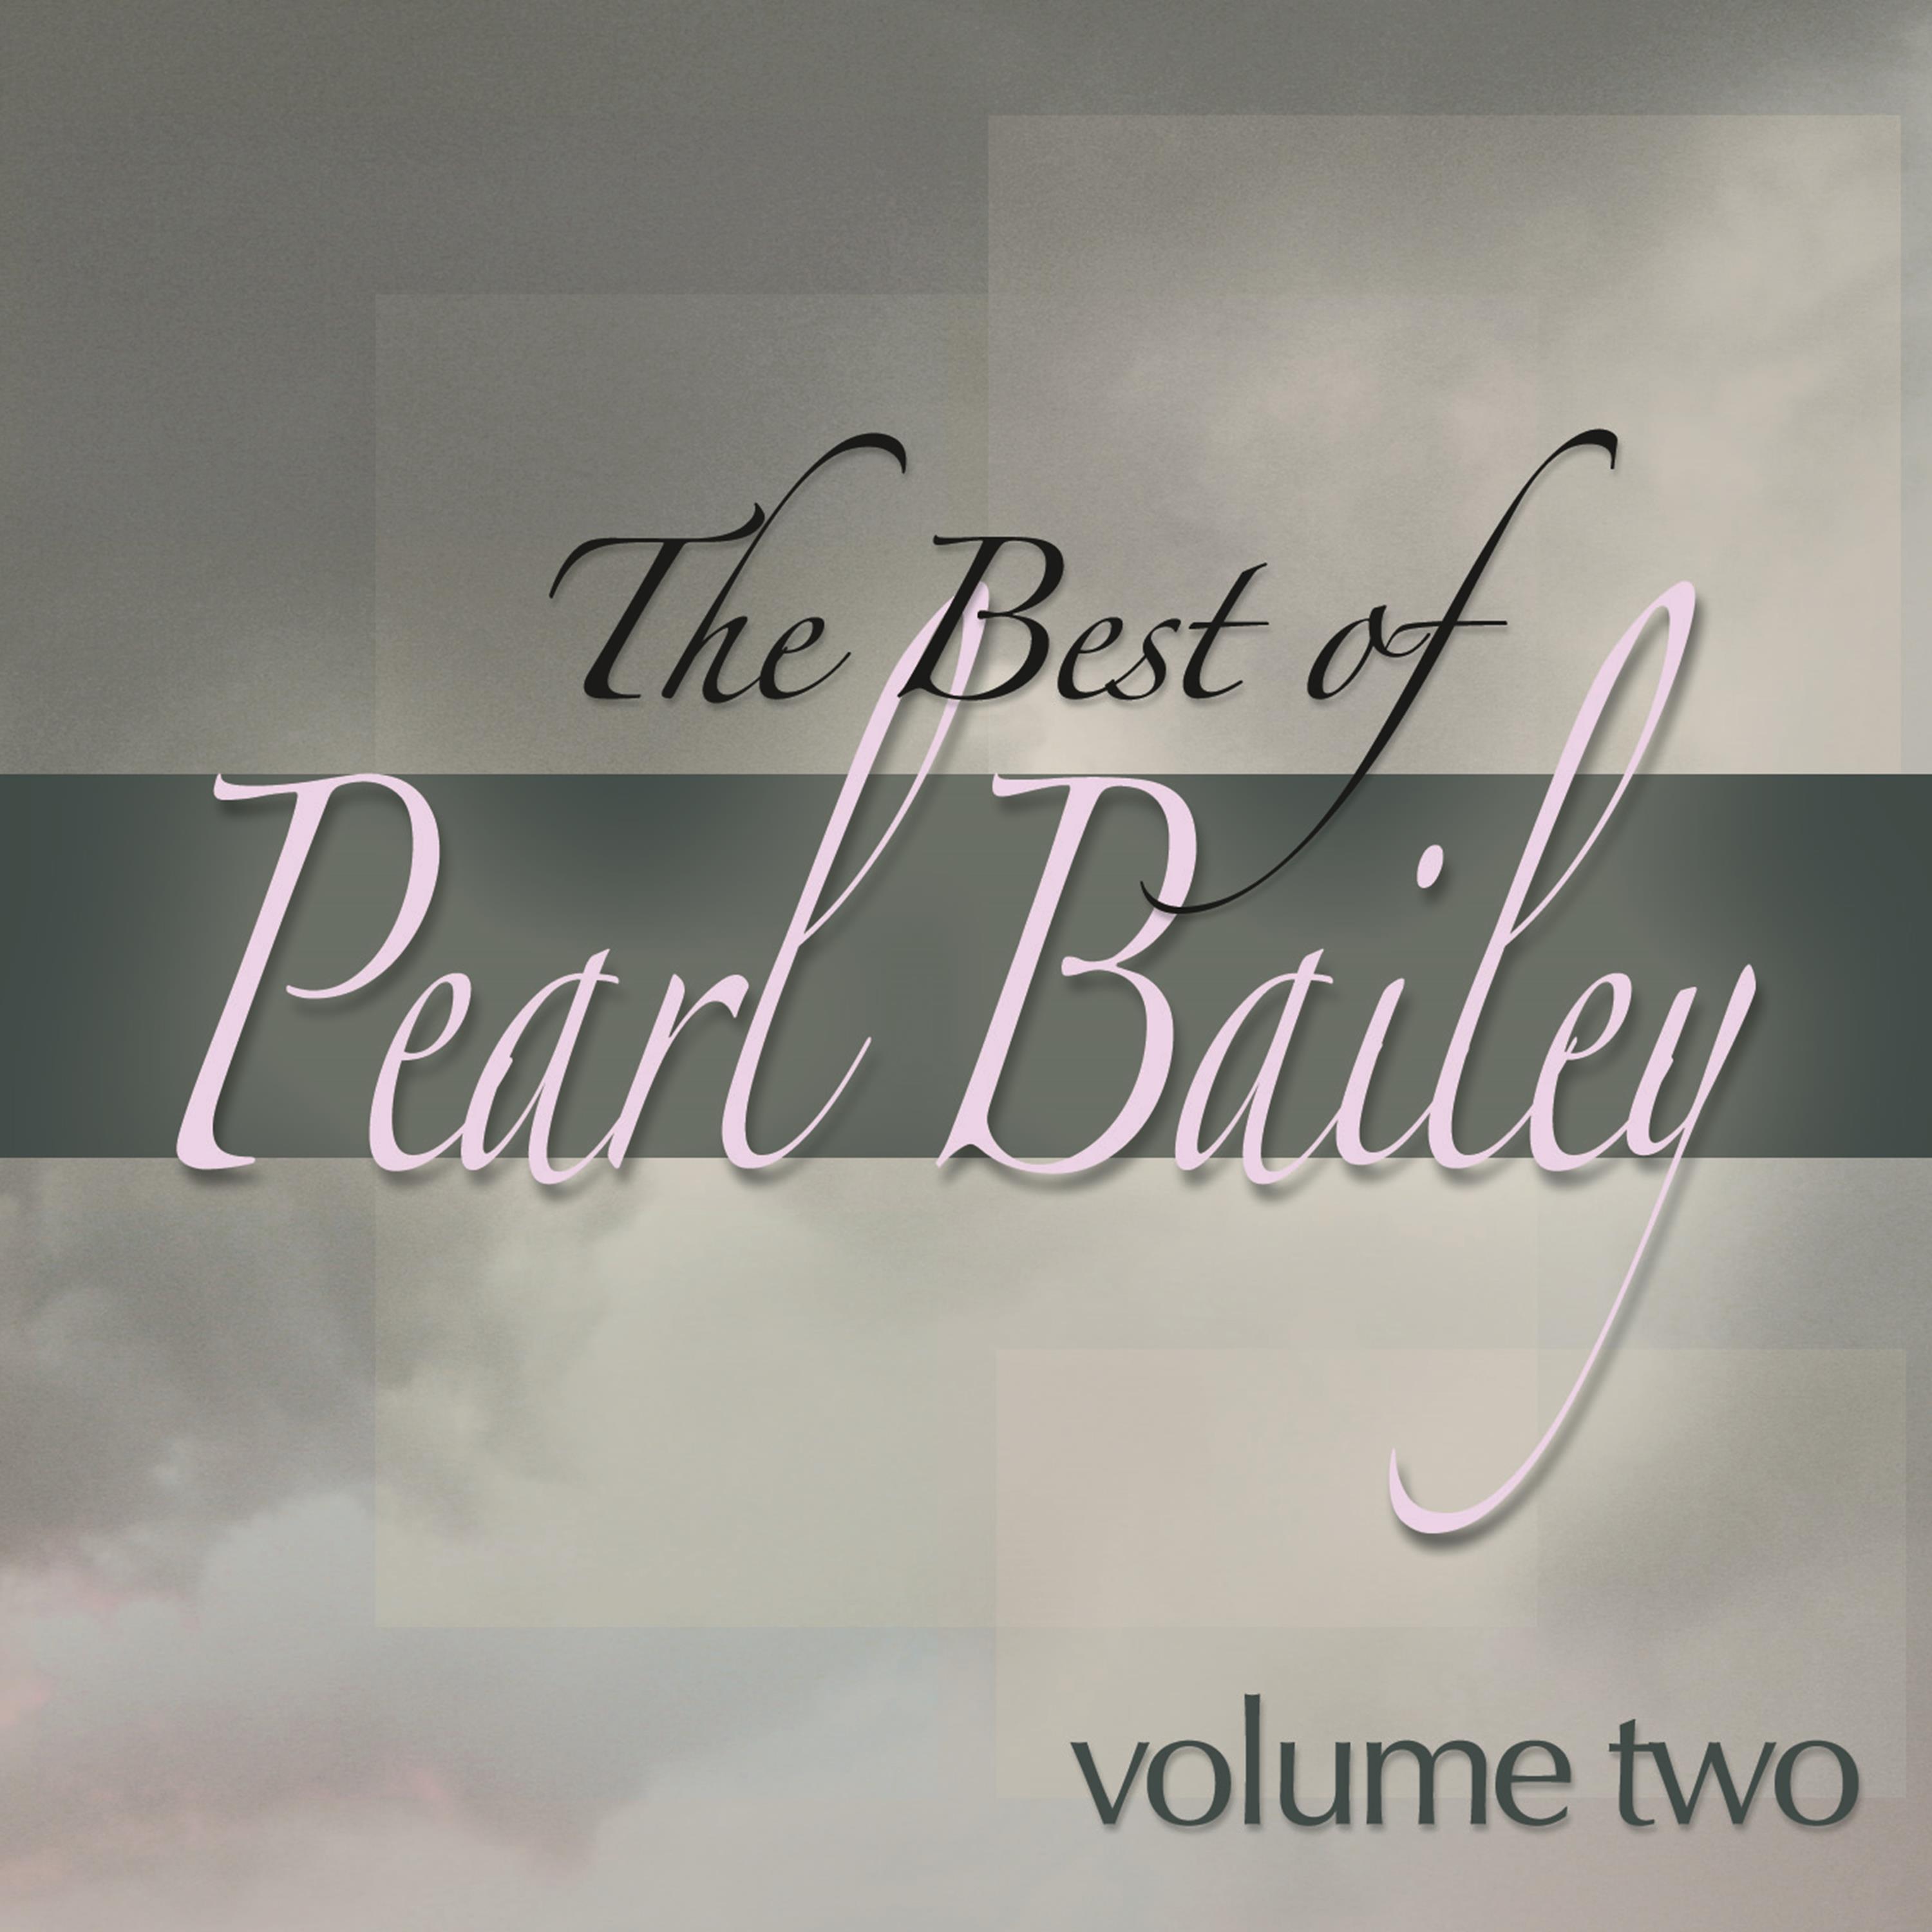 The Best of Pearl Bailey, Vol. 2